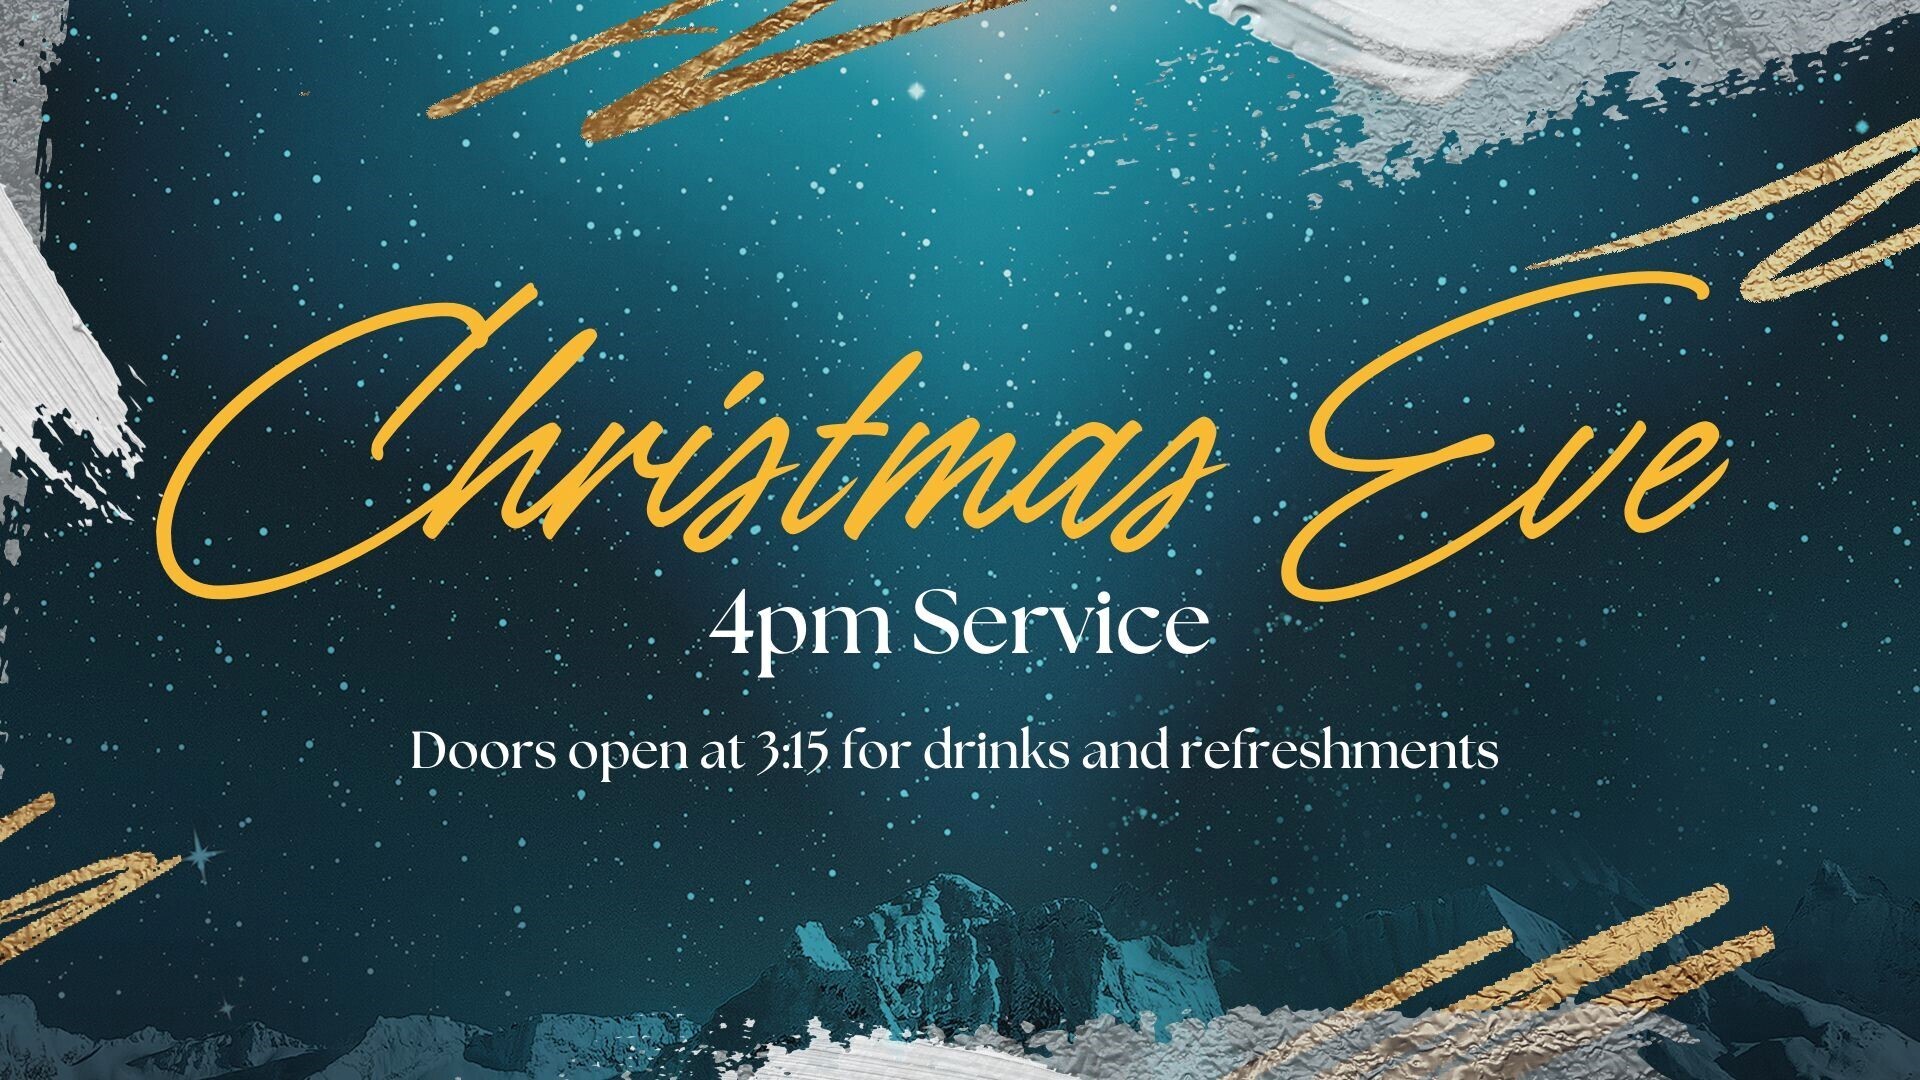 Invite people to the Christmas Eve Service at CPC